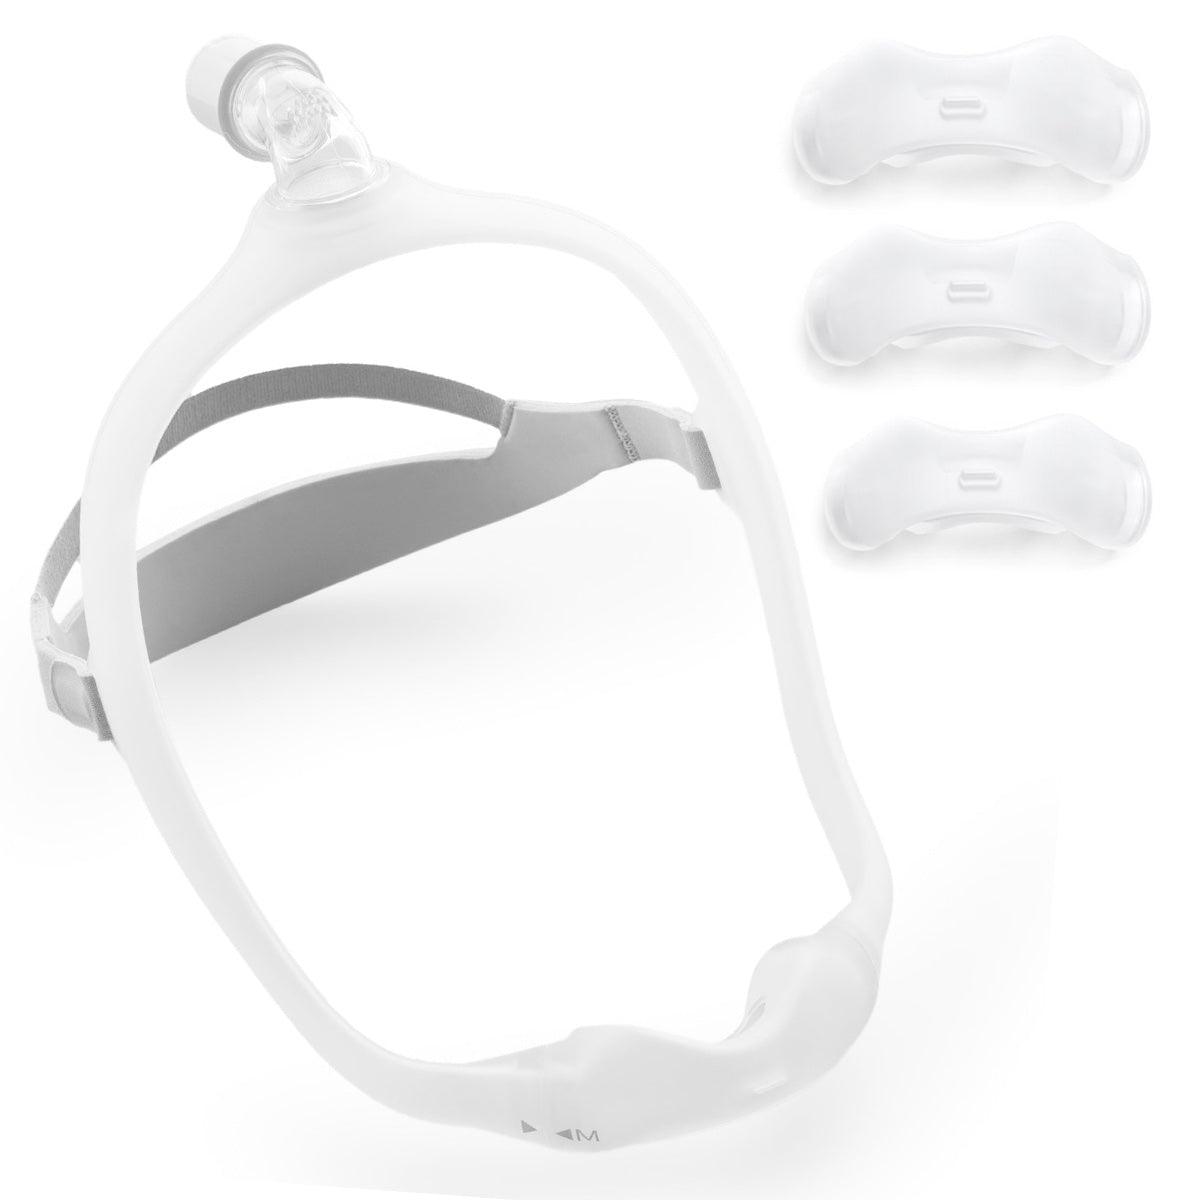 Philips Respironics DreamWear Under-the-Nose Nasal CPAP Mask